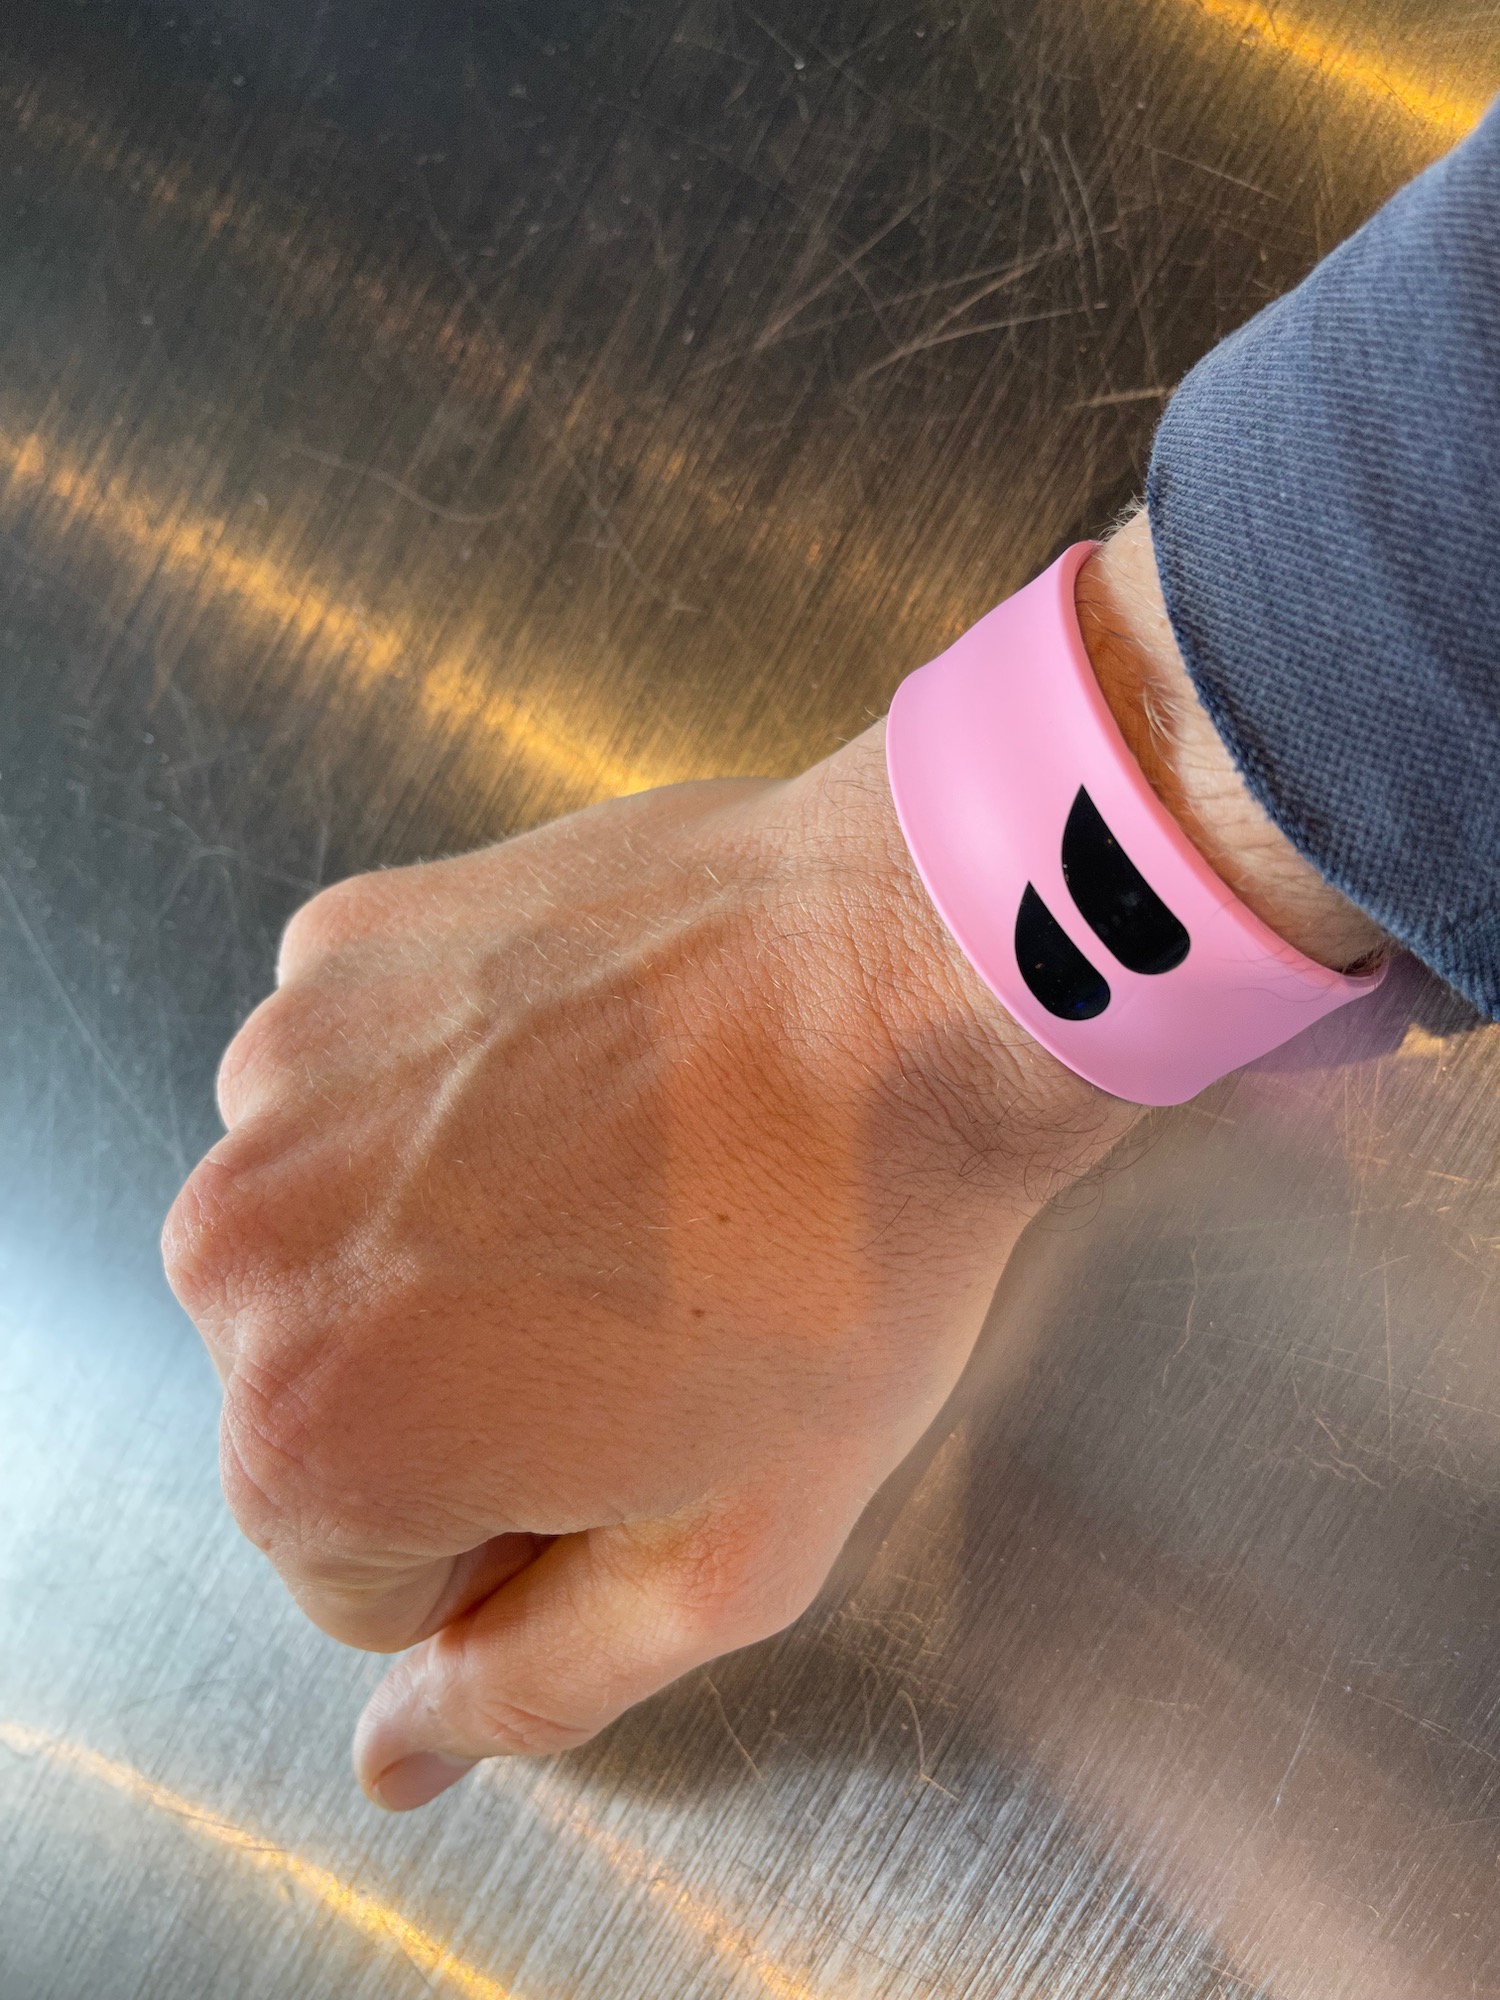 a person wearing a pink wristband